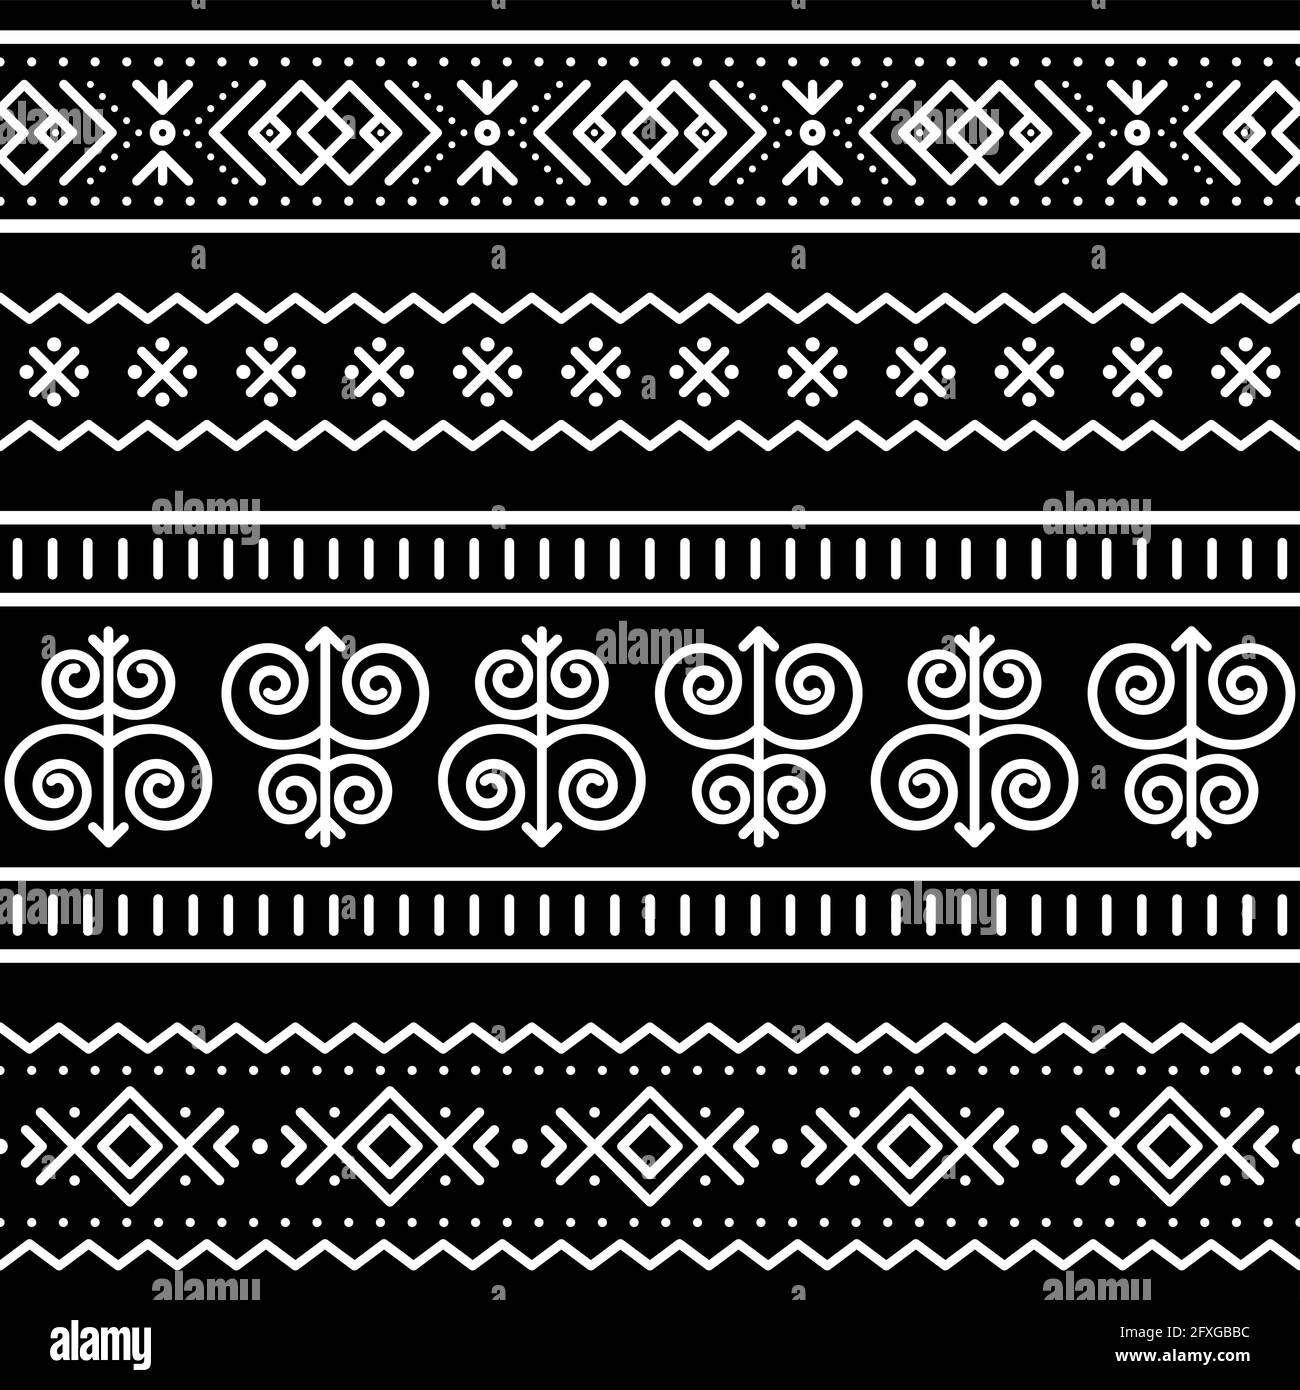 Slovak tribal folk art vector seamless geometric long horizontal pattern set, zig-zag, swirls, dots and abstract background inspired by traditional pa Stock Vector